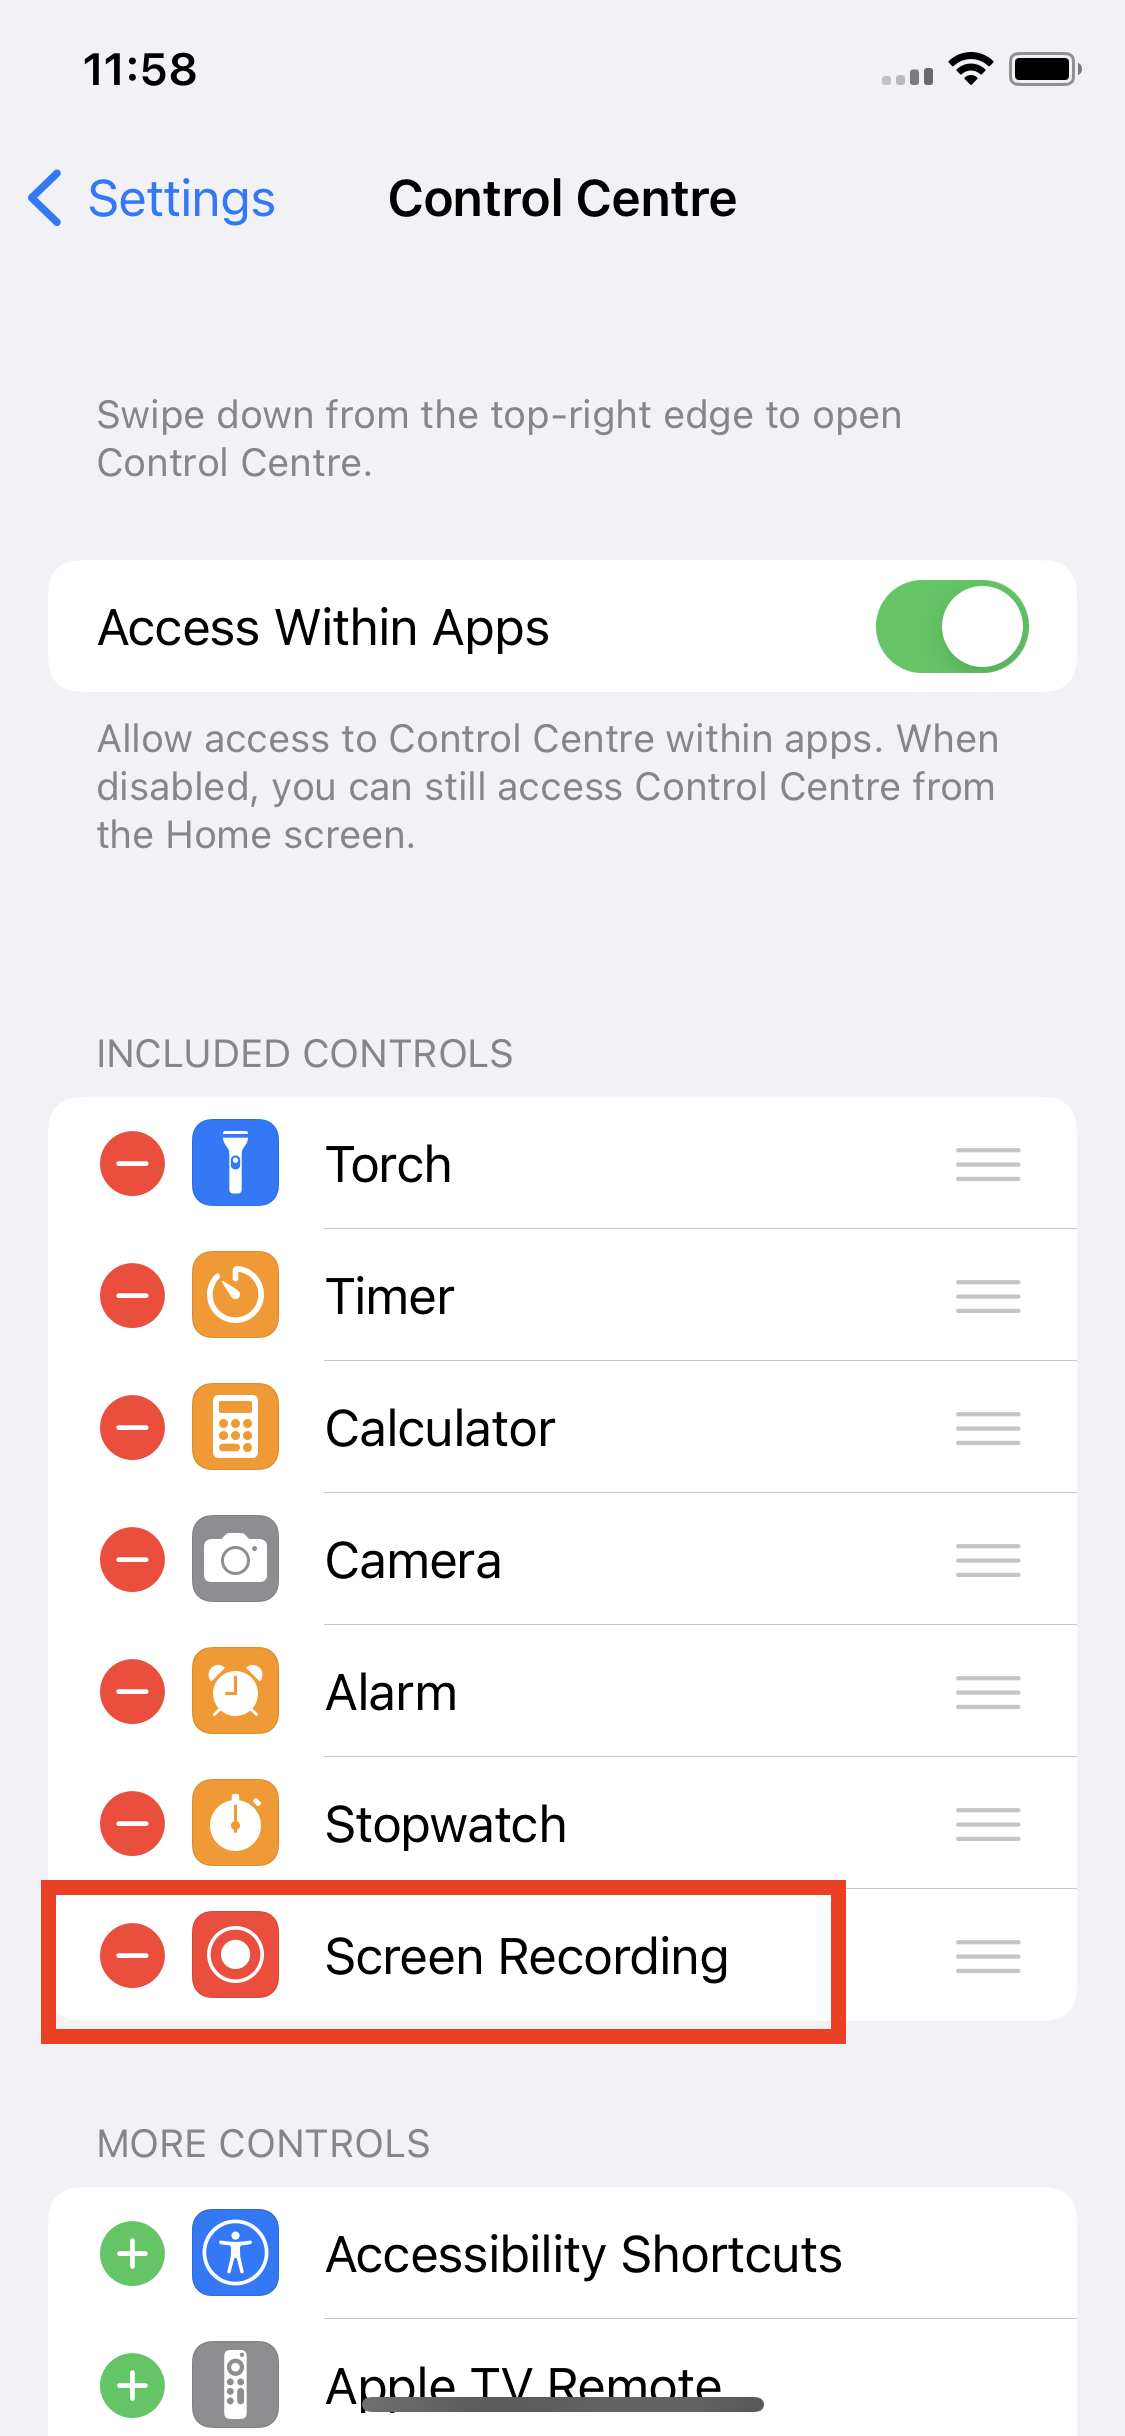 Screen Recording moved to the 'Included Controls’ section